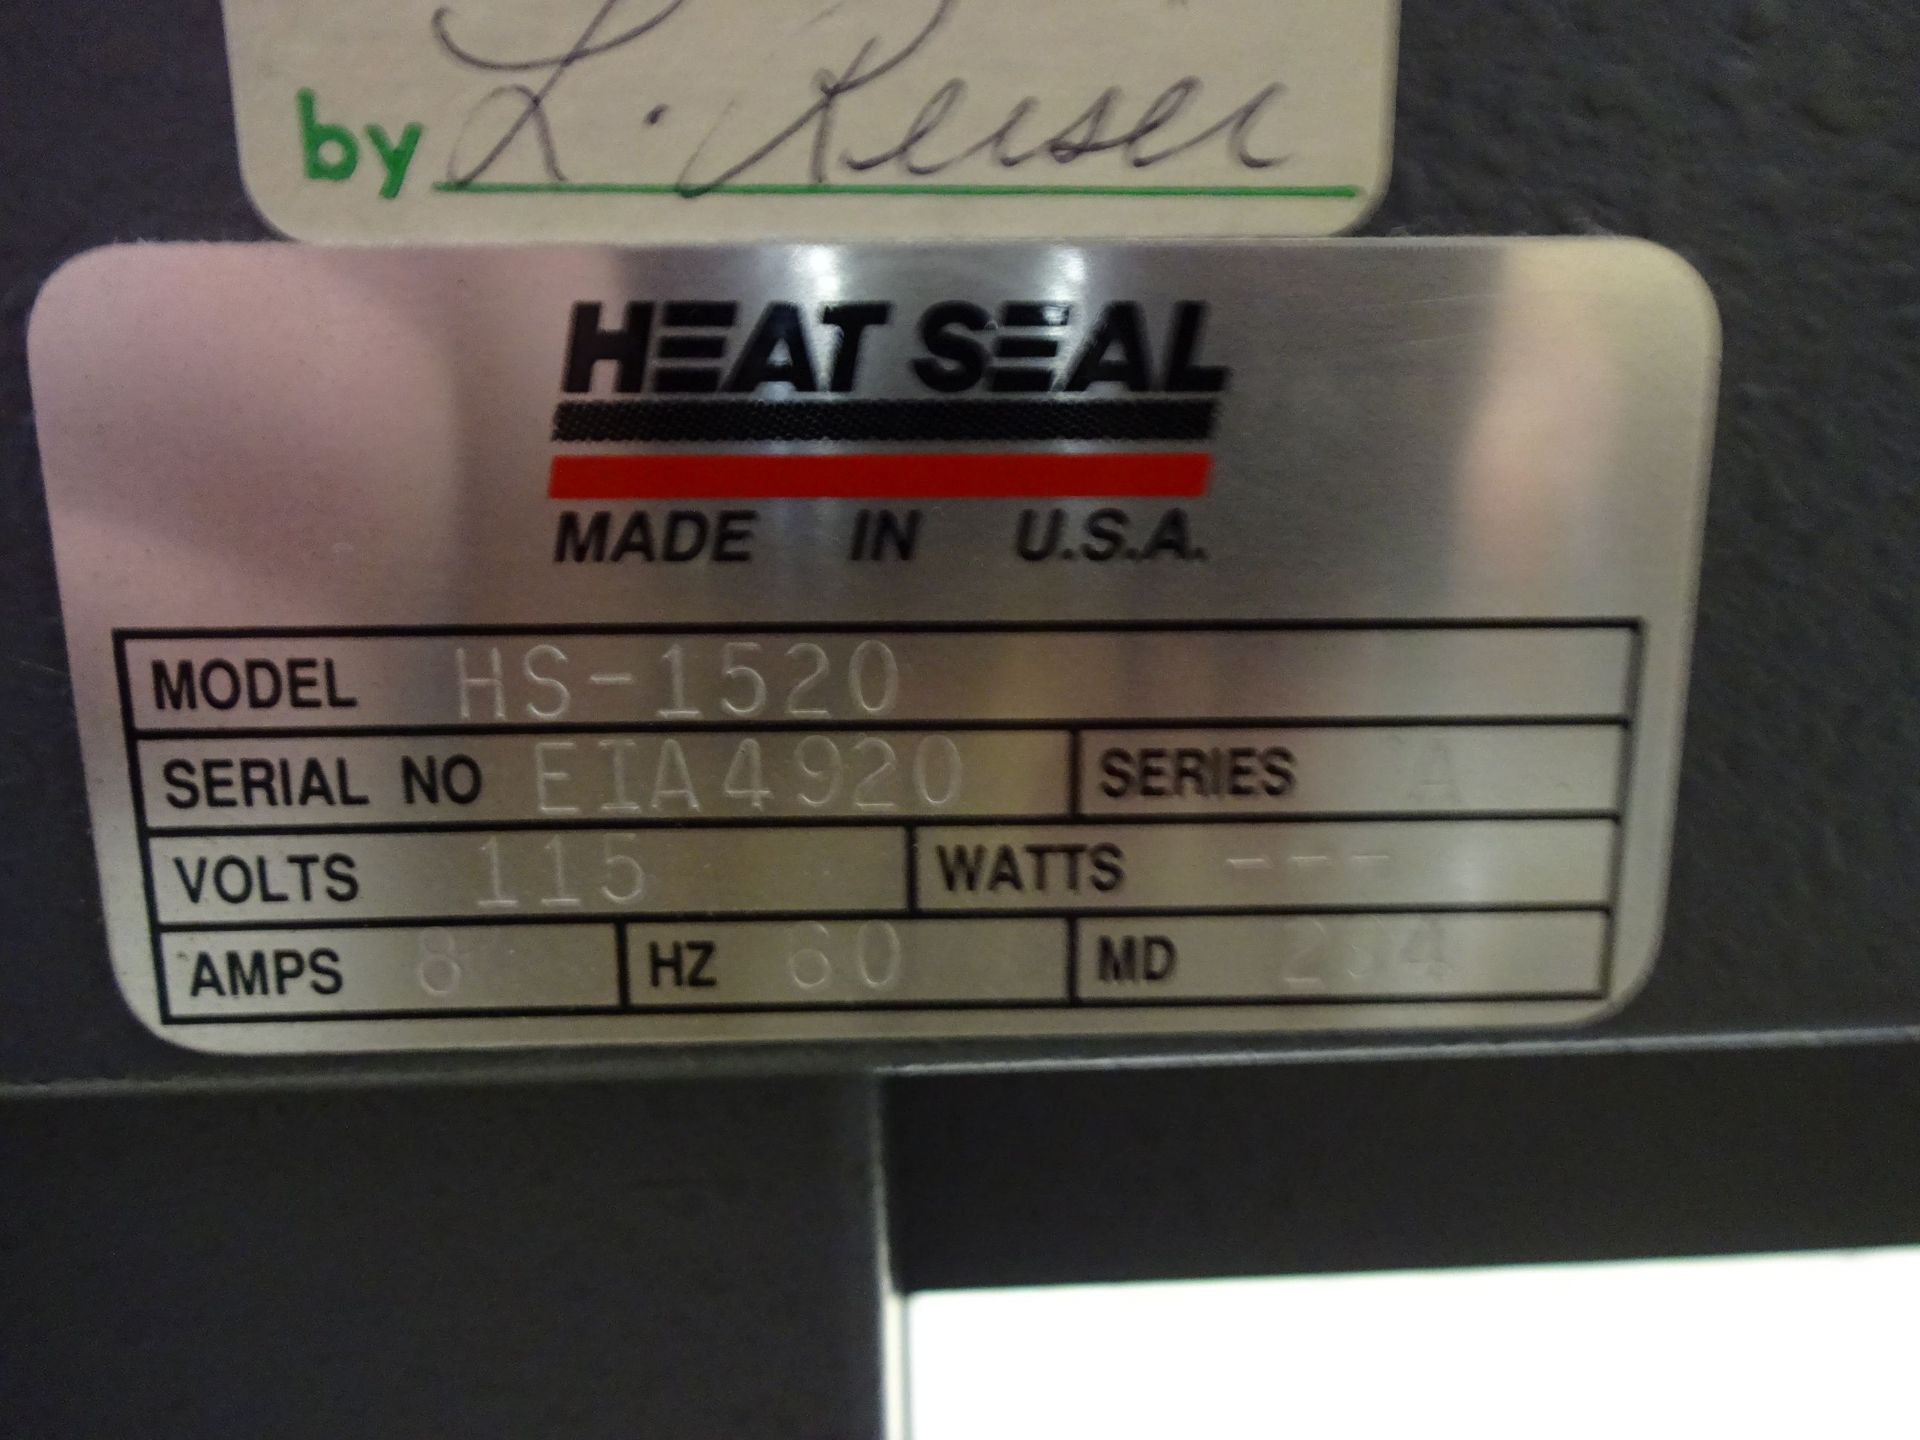 15" X 20" HEAT SEAL MODEL HS-1520 "L-BAR" SEALER; S/N EIA4920 WITH 26" LONG X 15" WIDE X 8" HIGH - Image 8 of 8